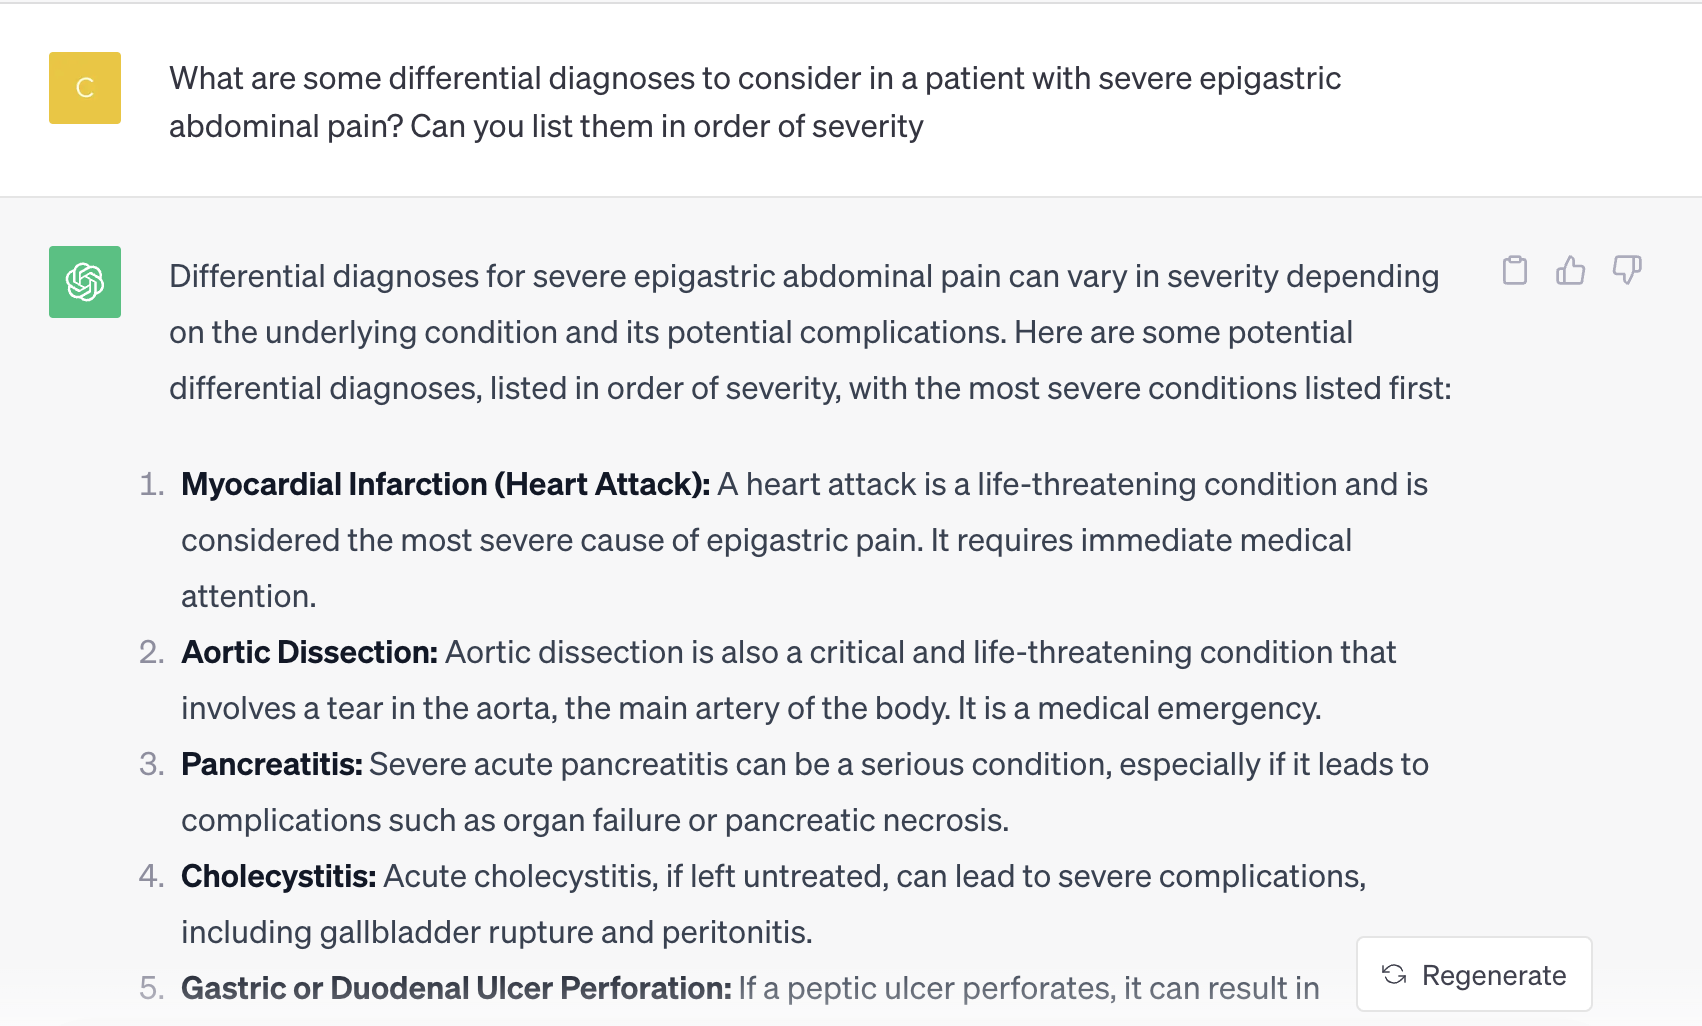 Asking ChatGPT to generate a list of differential diagnoses for epigastric pain